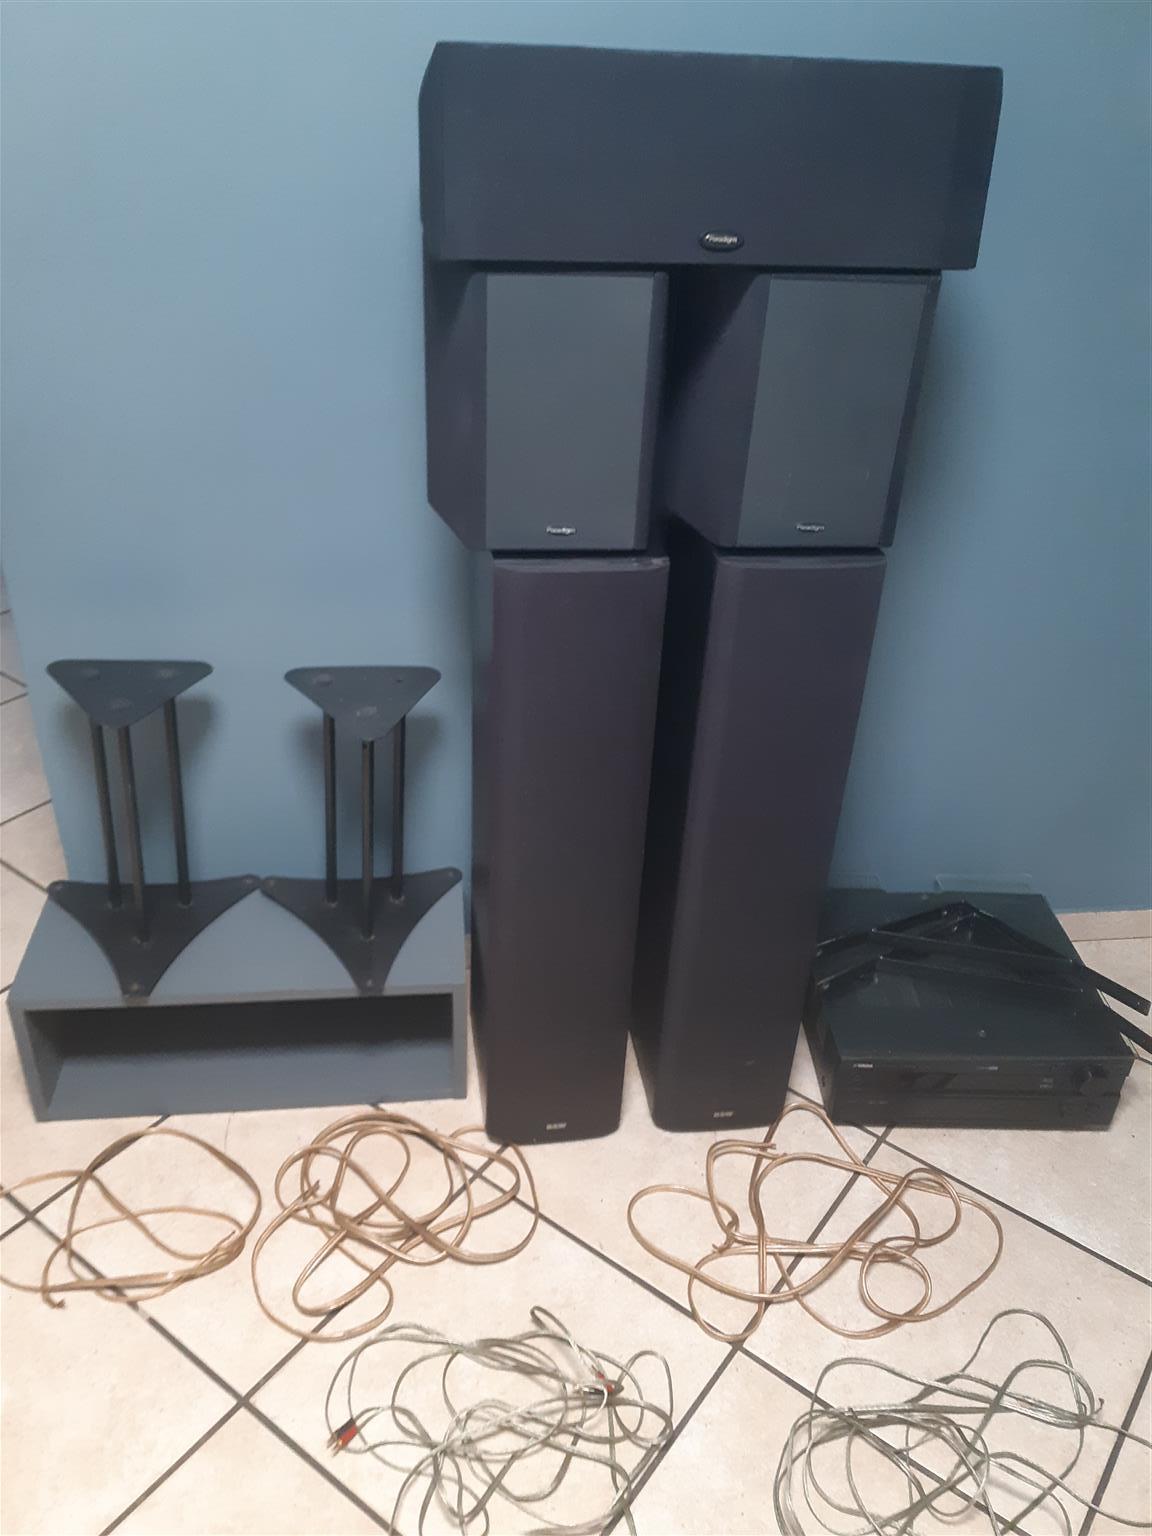 Yamaha, B&W, Paradigm Home Theater System for sale.